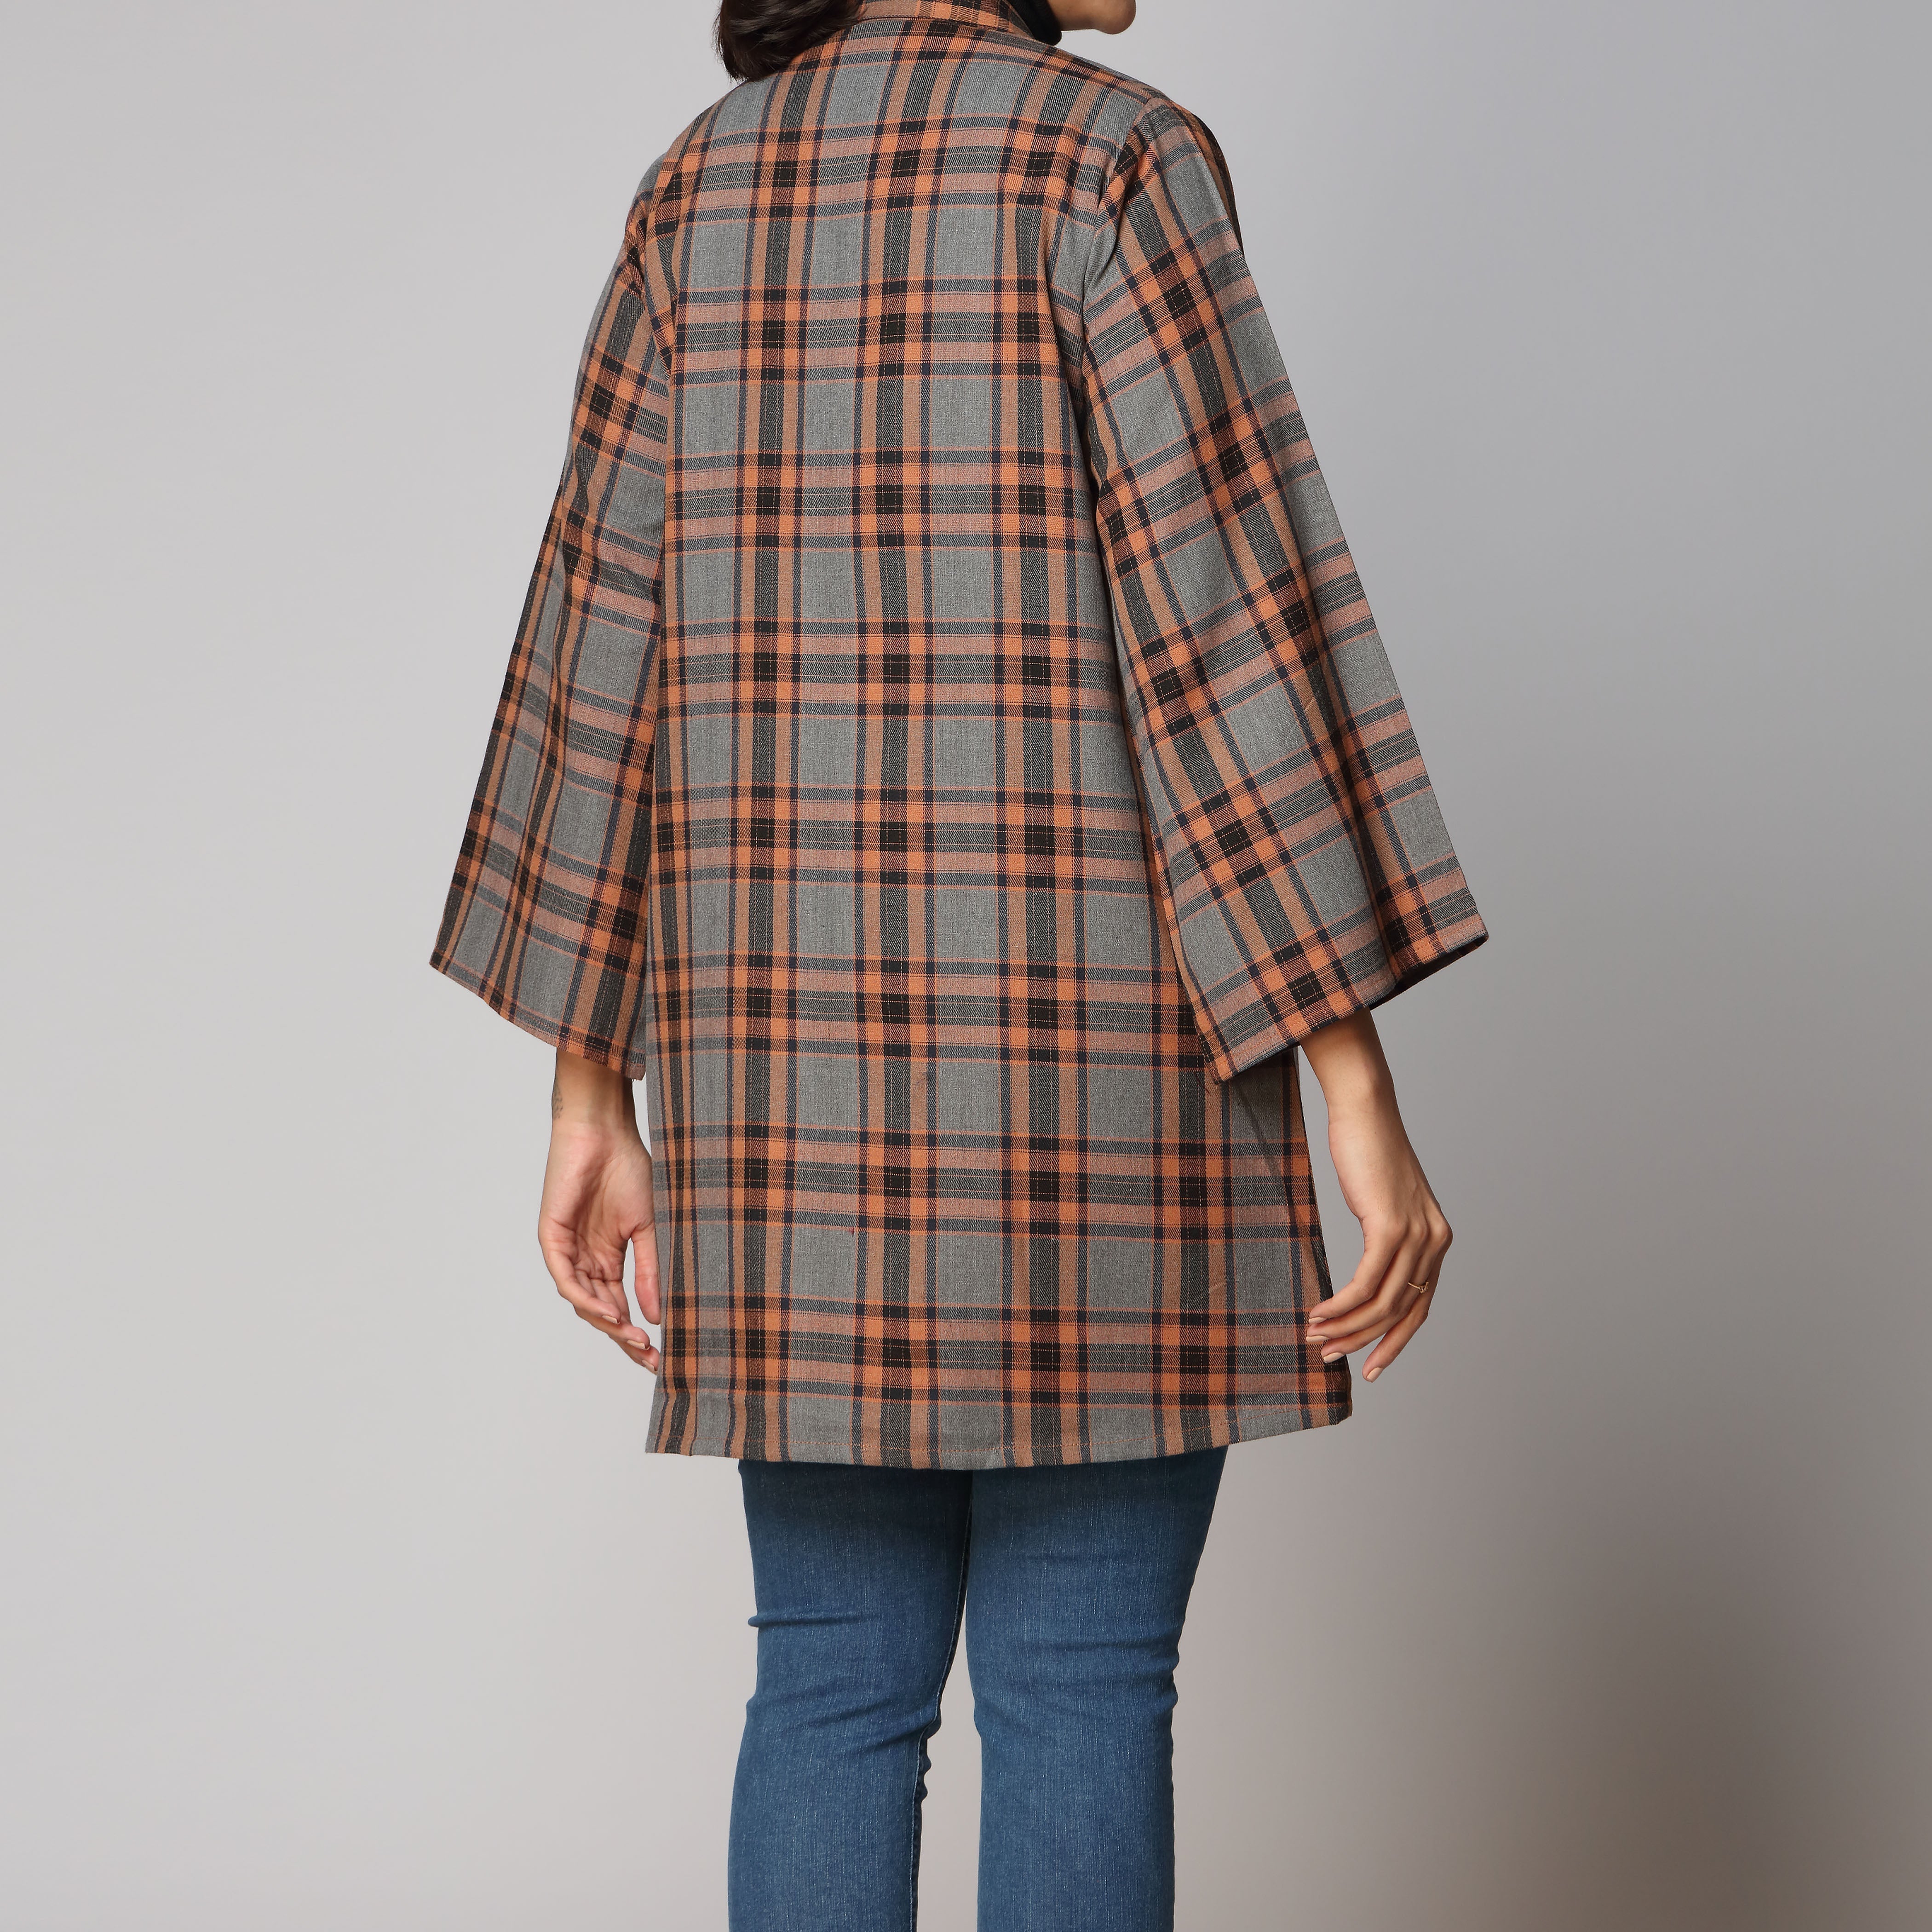 1PC- Flannel Checkered Shirt  PW2311